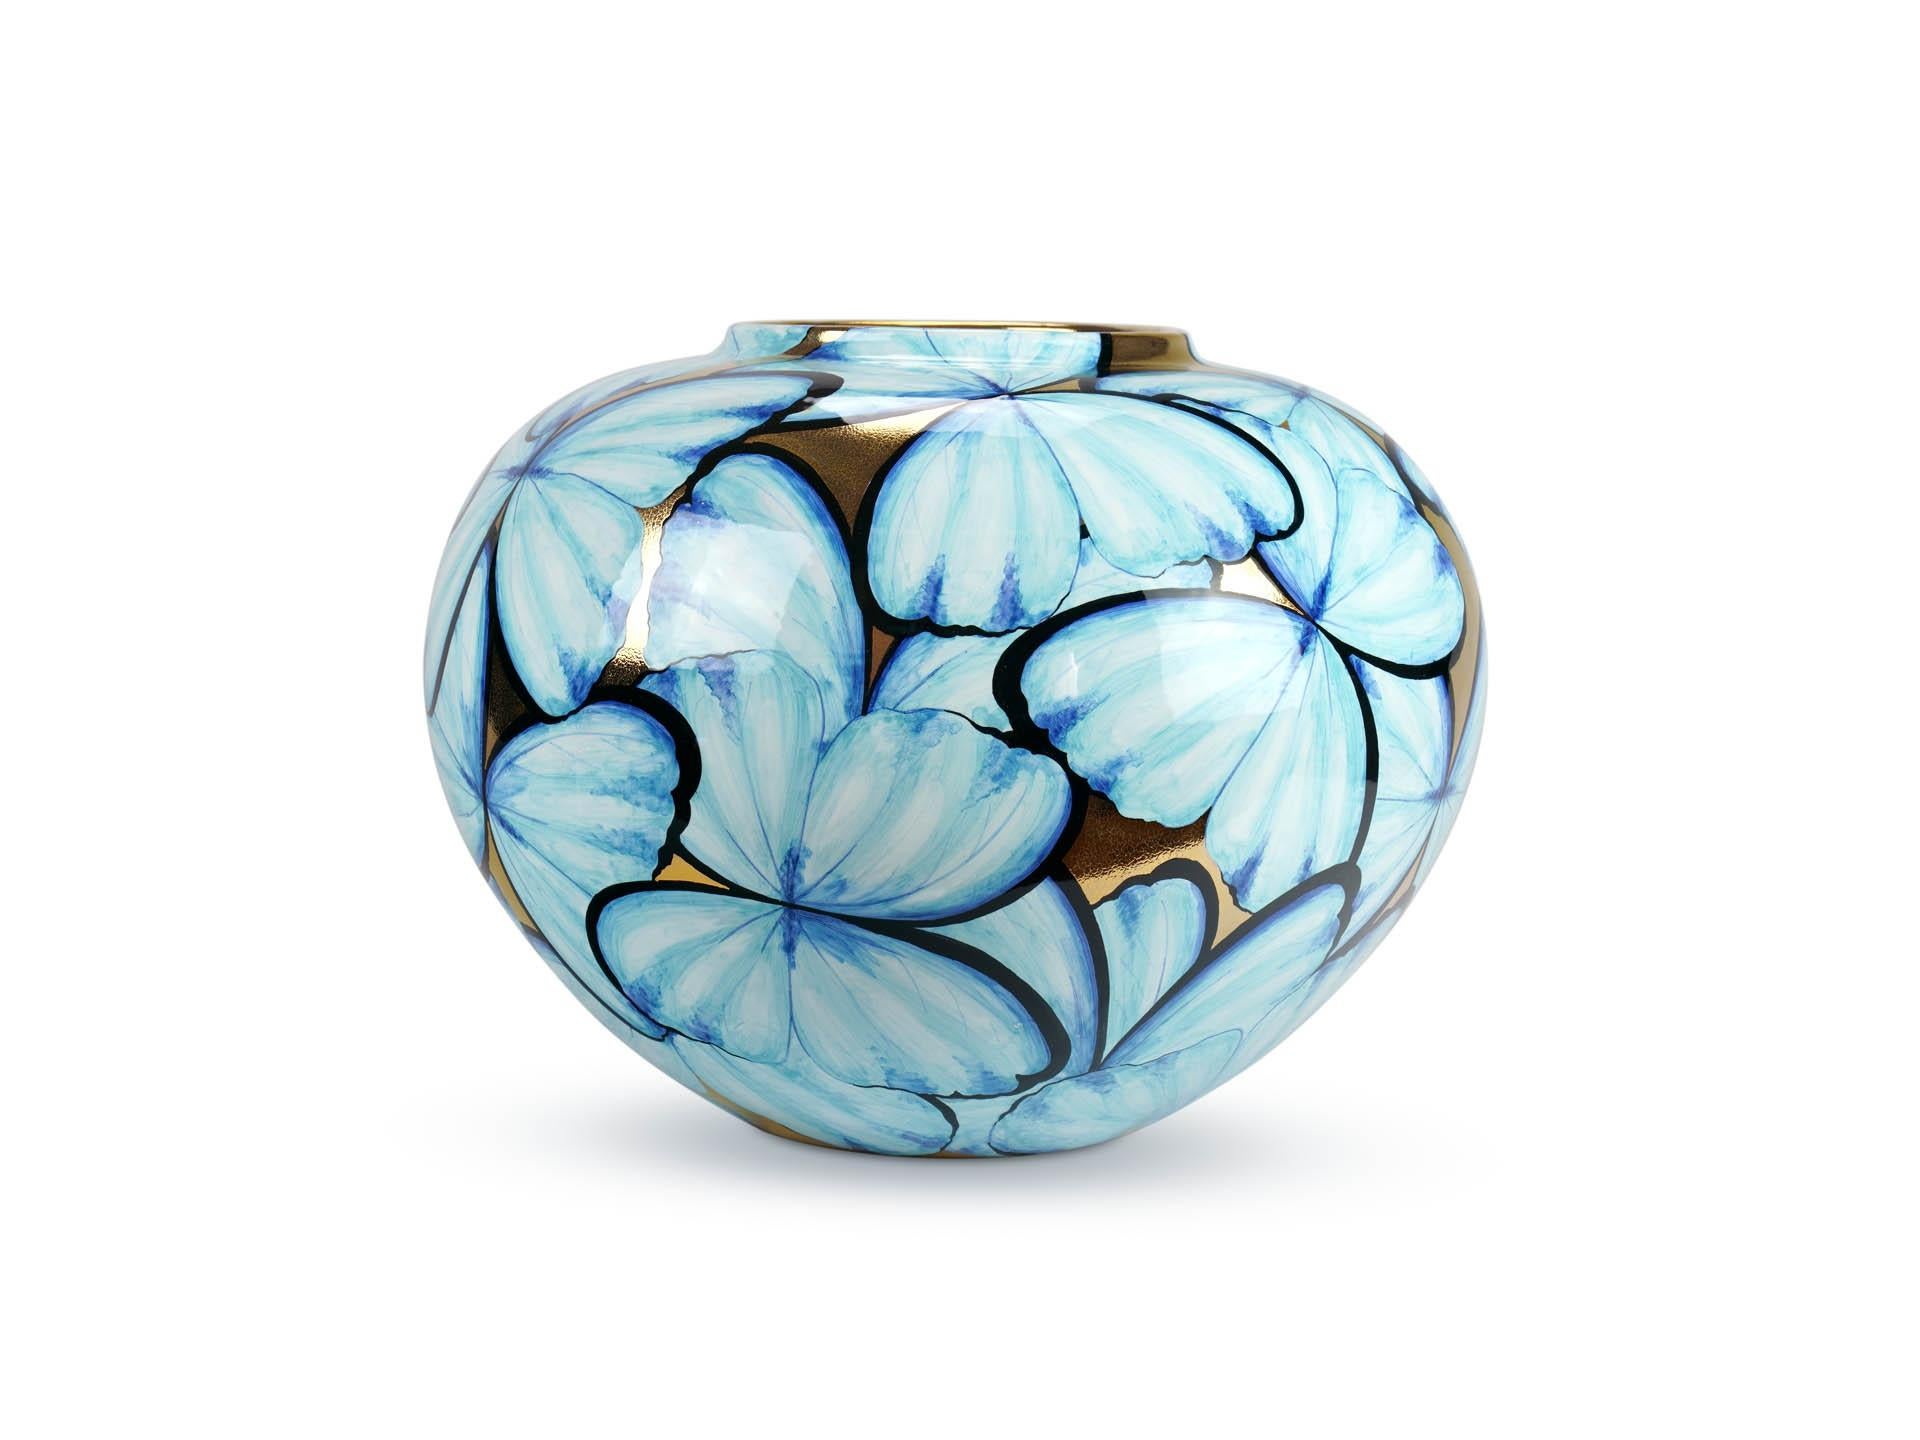 Our 'Petalouda Gold' majolica vase showcases the timeless allure of the blue butterfly capturing the essence of its elegance. Revered across cultures as a symbol of wishes fulfilled, joy, and transformation, the delicate beauty of these creatures